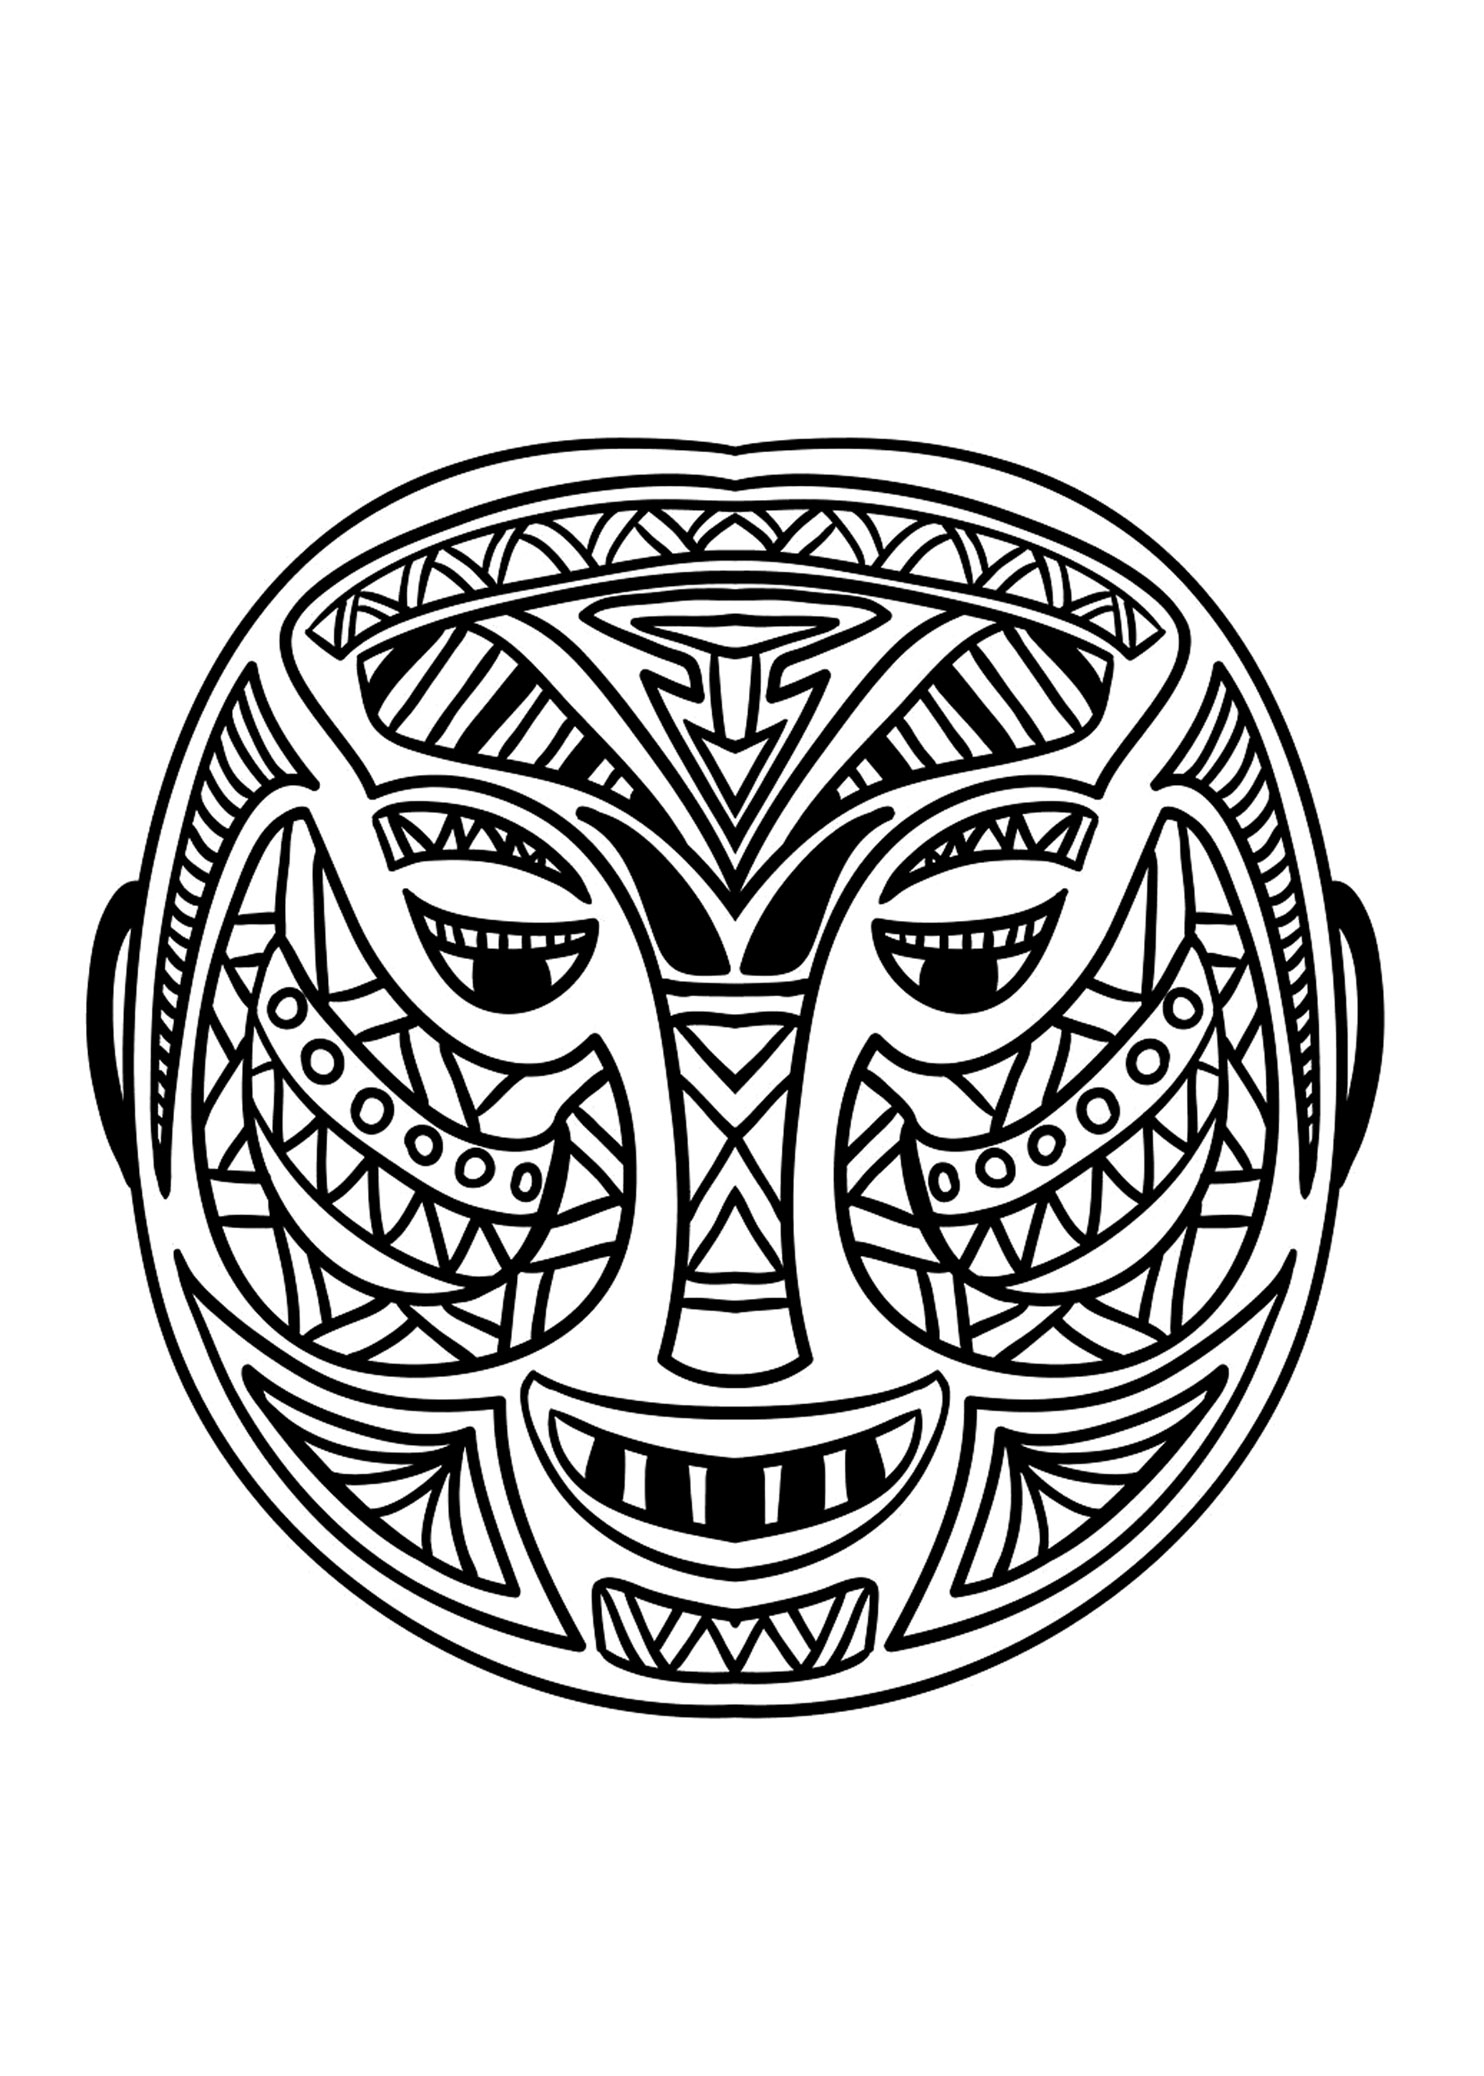 Coloring picture of an African mask - 5